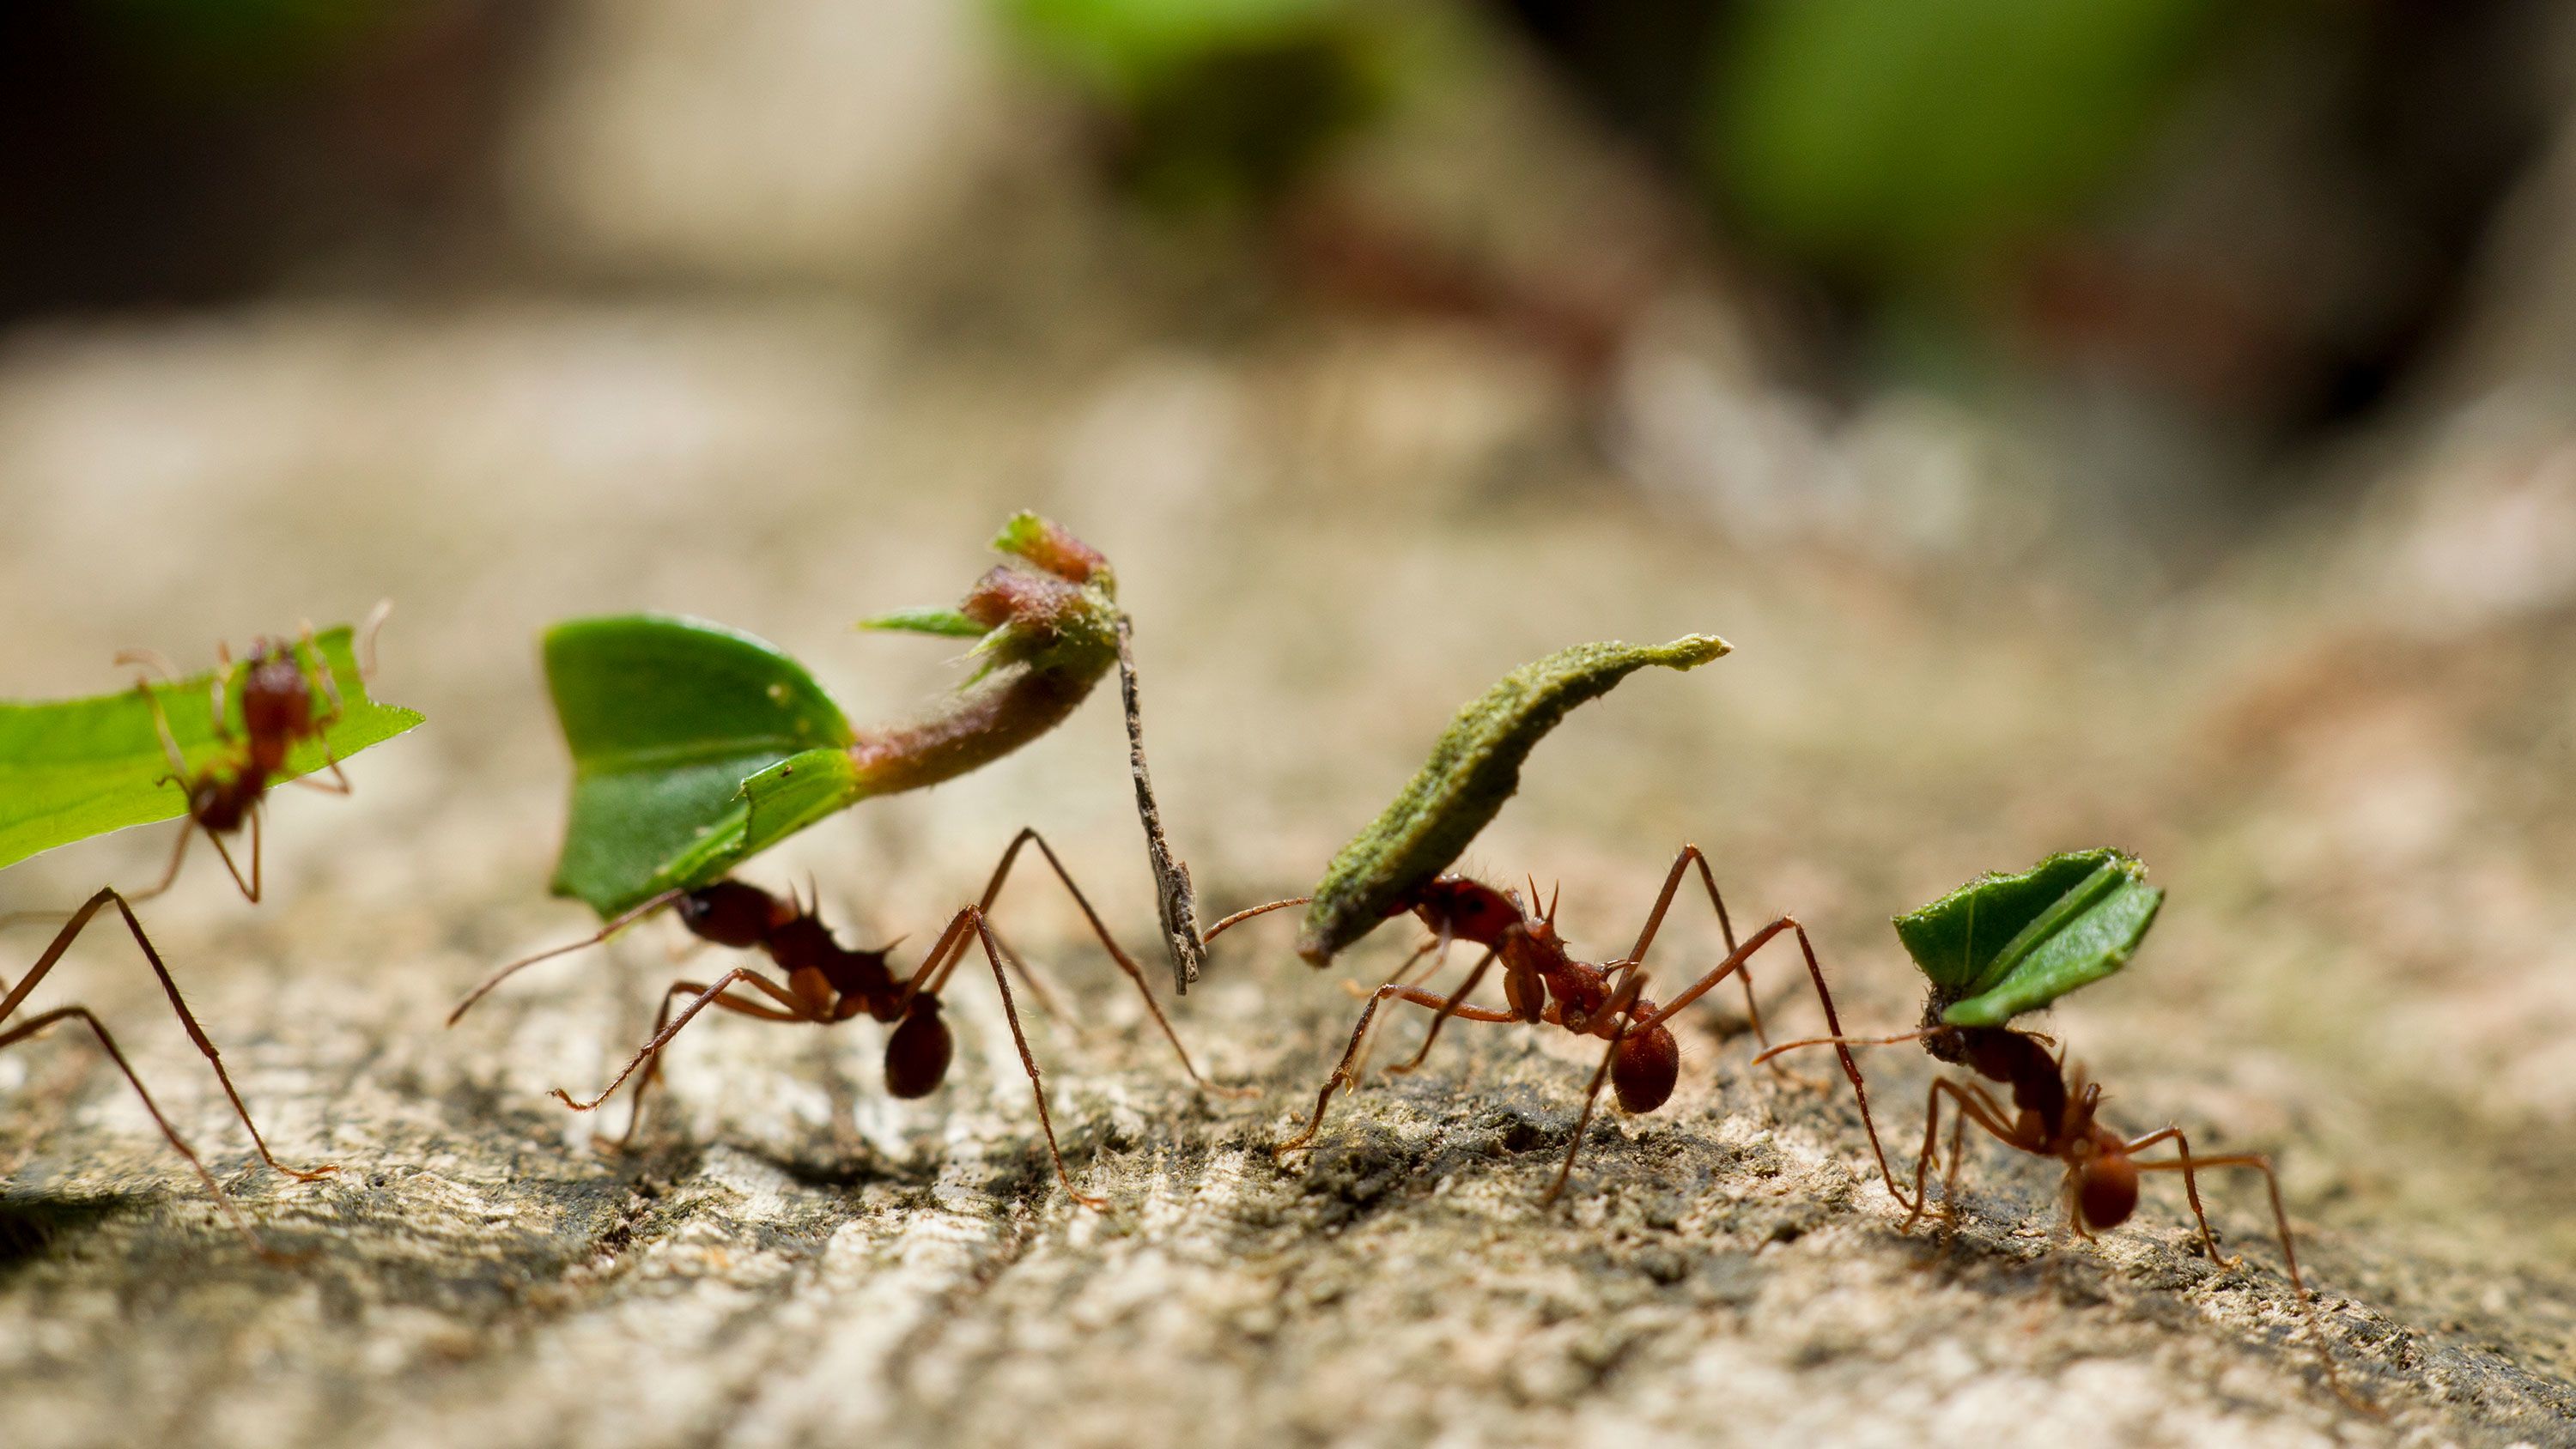 Scientists estimated how many ants there are on Earth | CNN